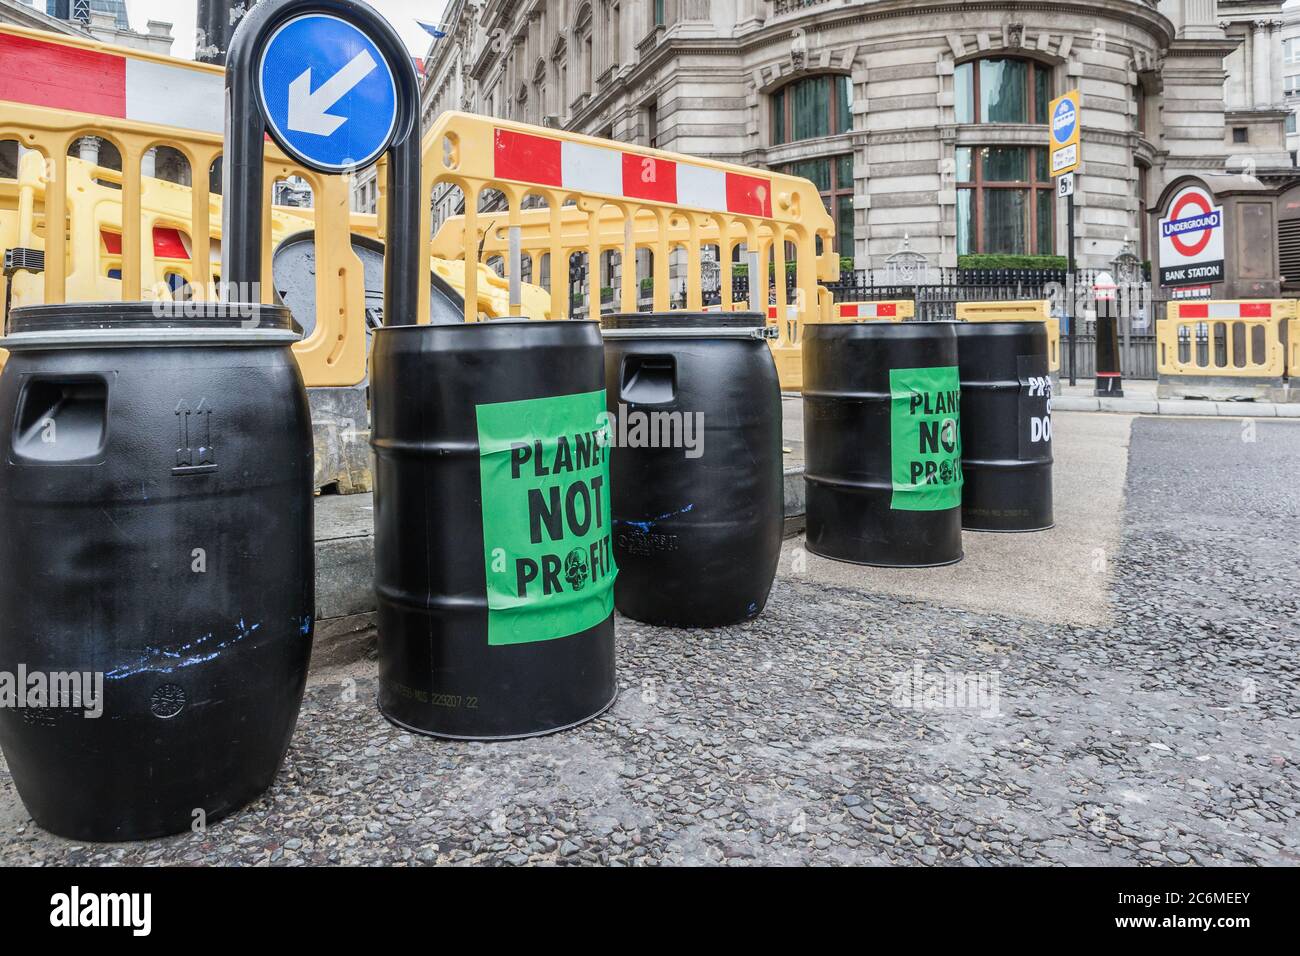 Extinction Rebellion protested outside the Bank Of England by pouring fake petroleum on the street to highlight the bailout of the big corporations. Stock Photo